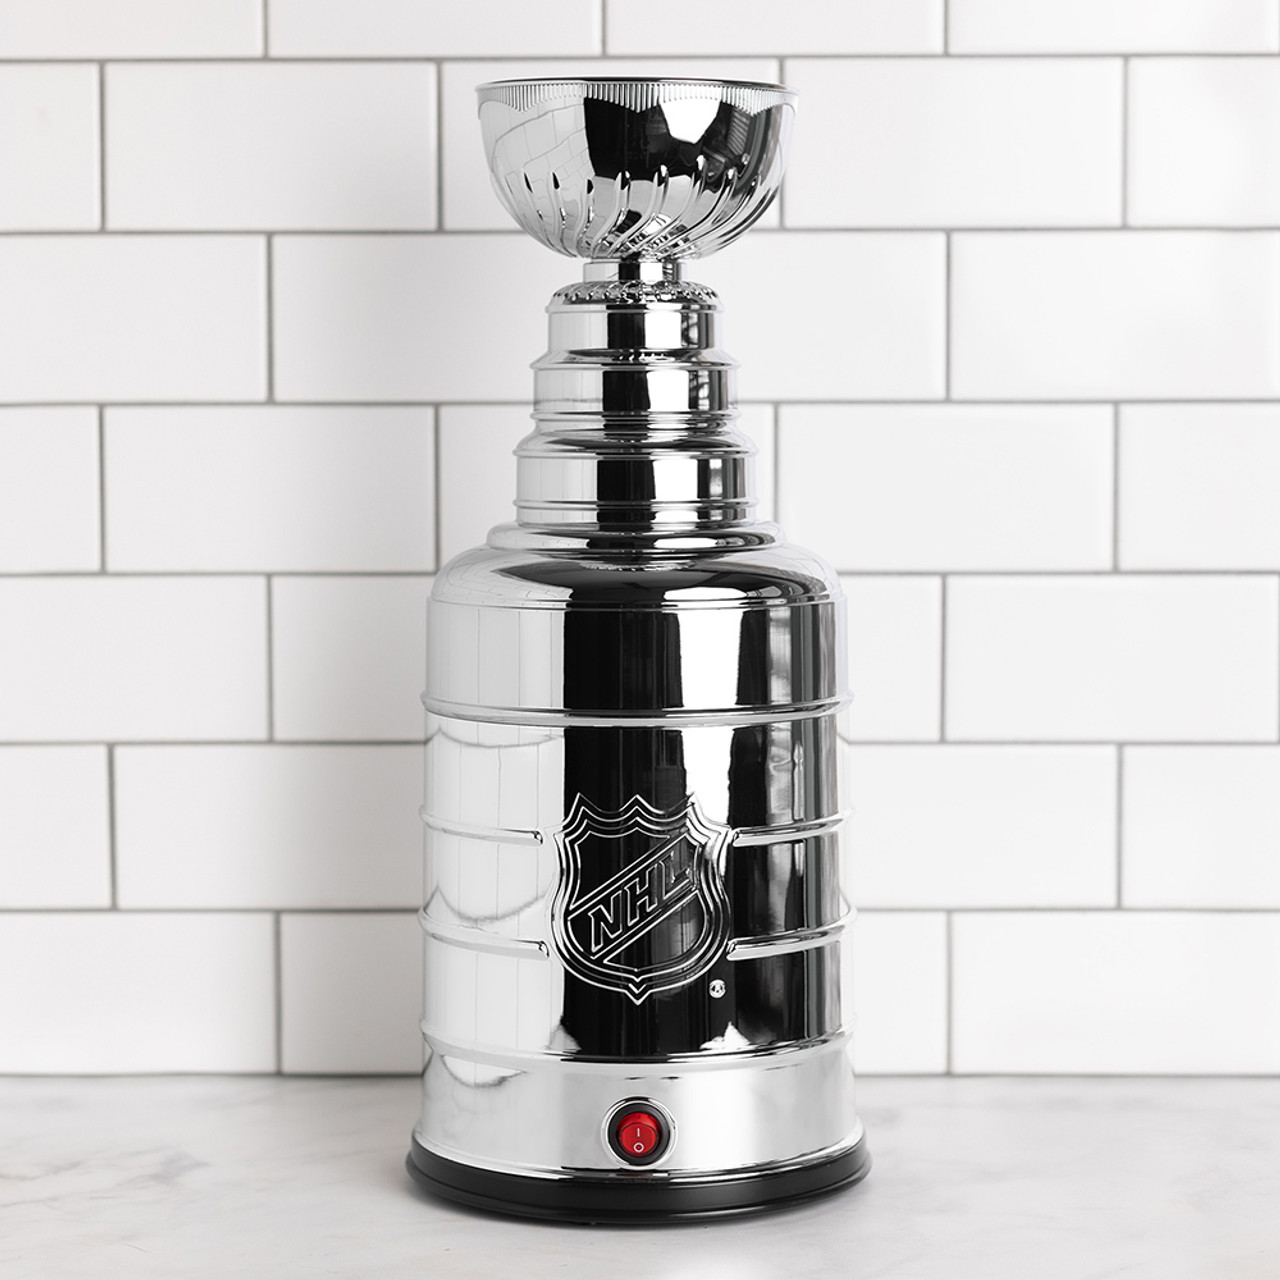 Miniature Stanley Cup Collection - Blender Market